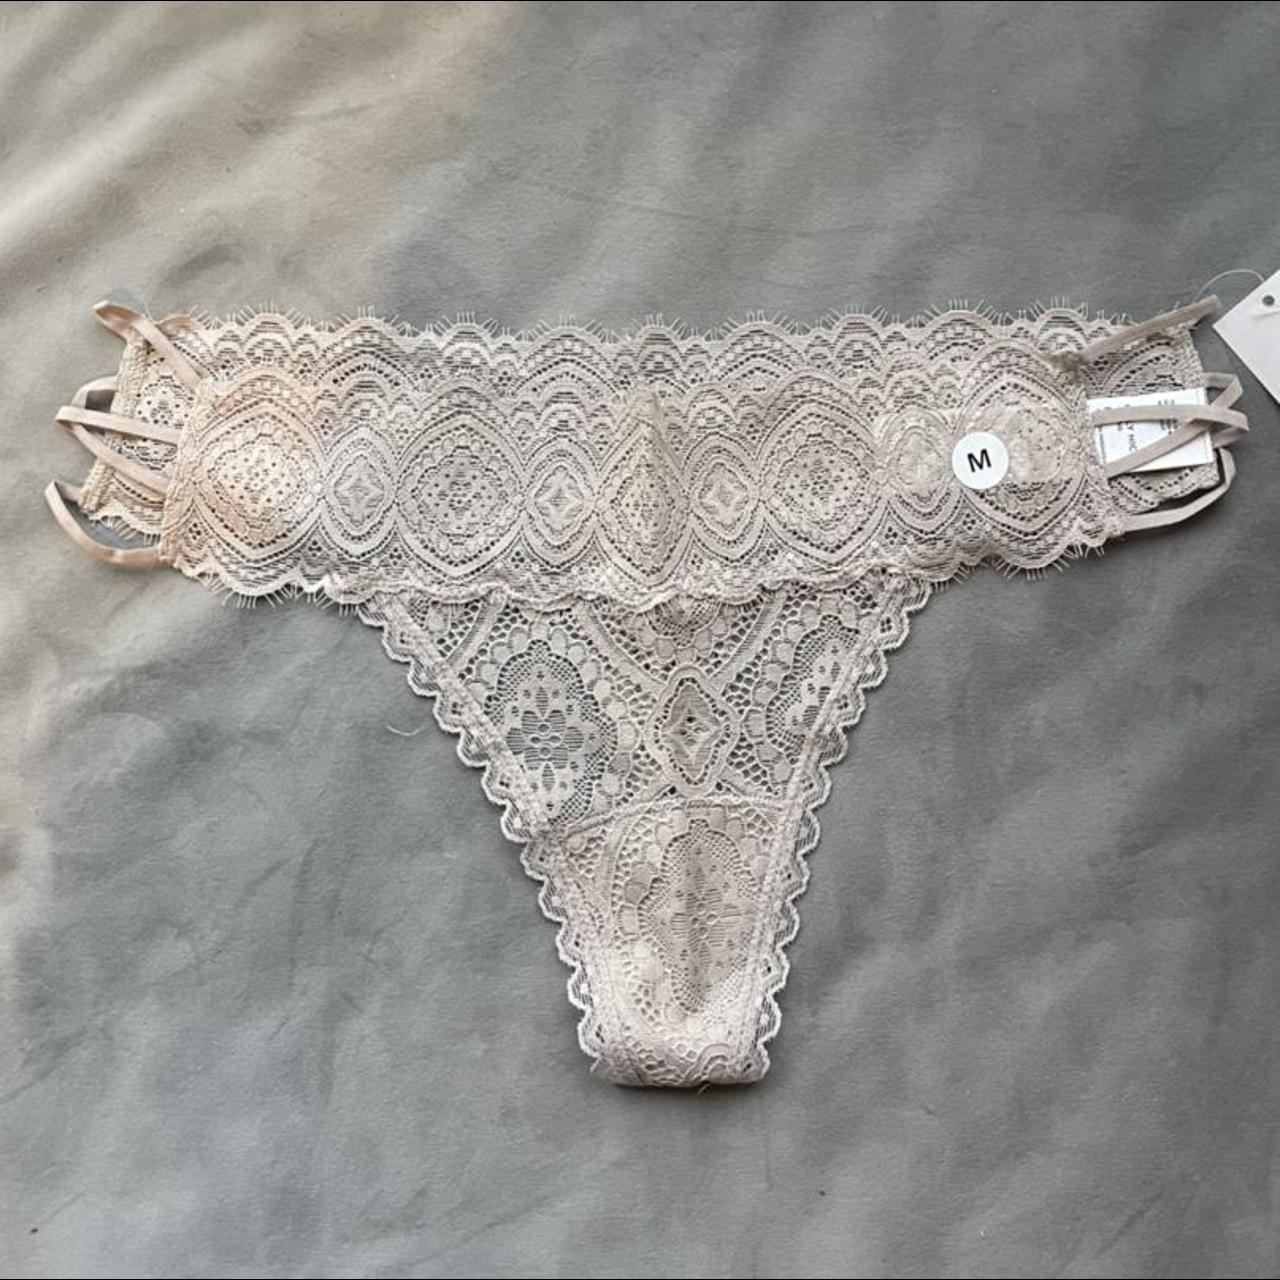 Hollister Gilly Hicks Lace String Thong Underwear in White